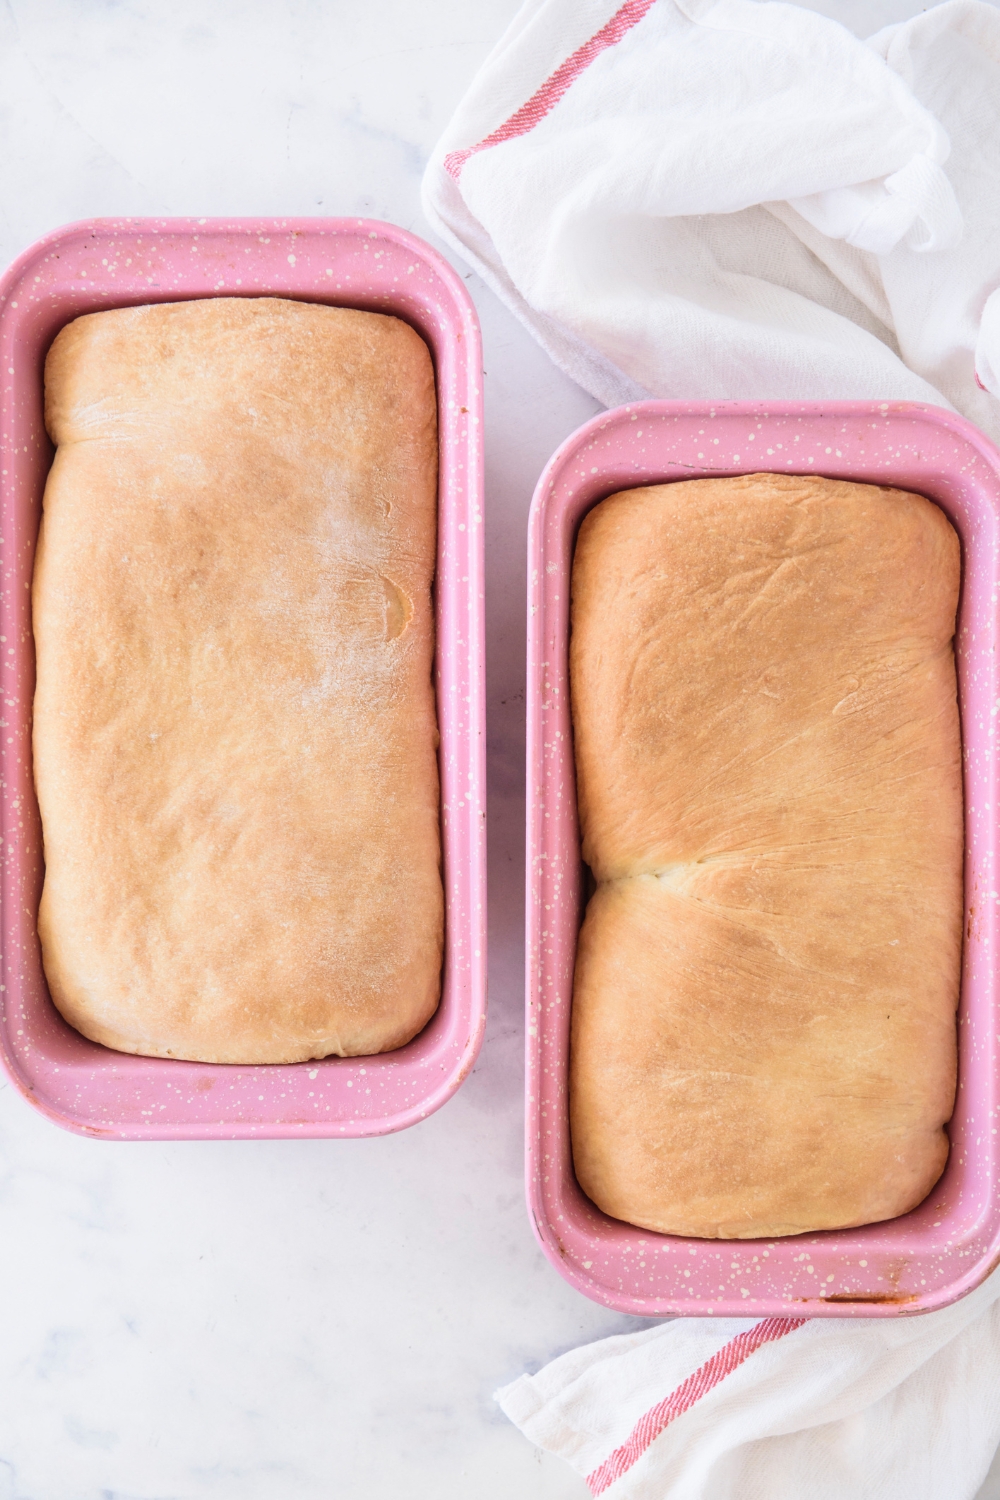 Two loaf pans with baked bread.